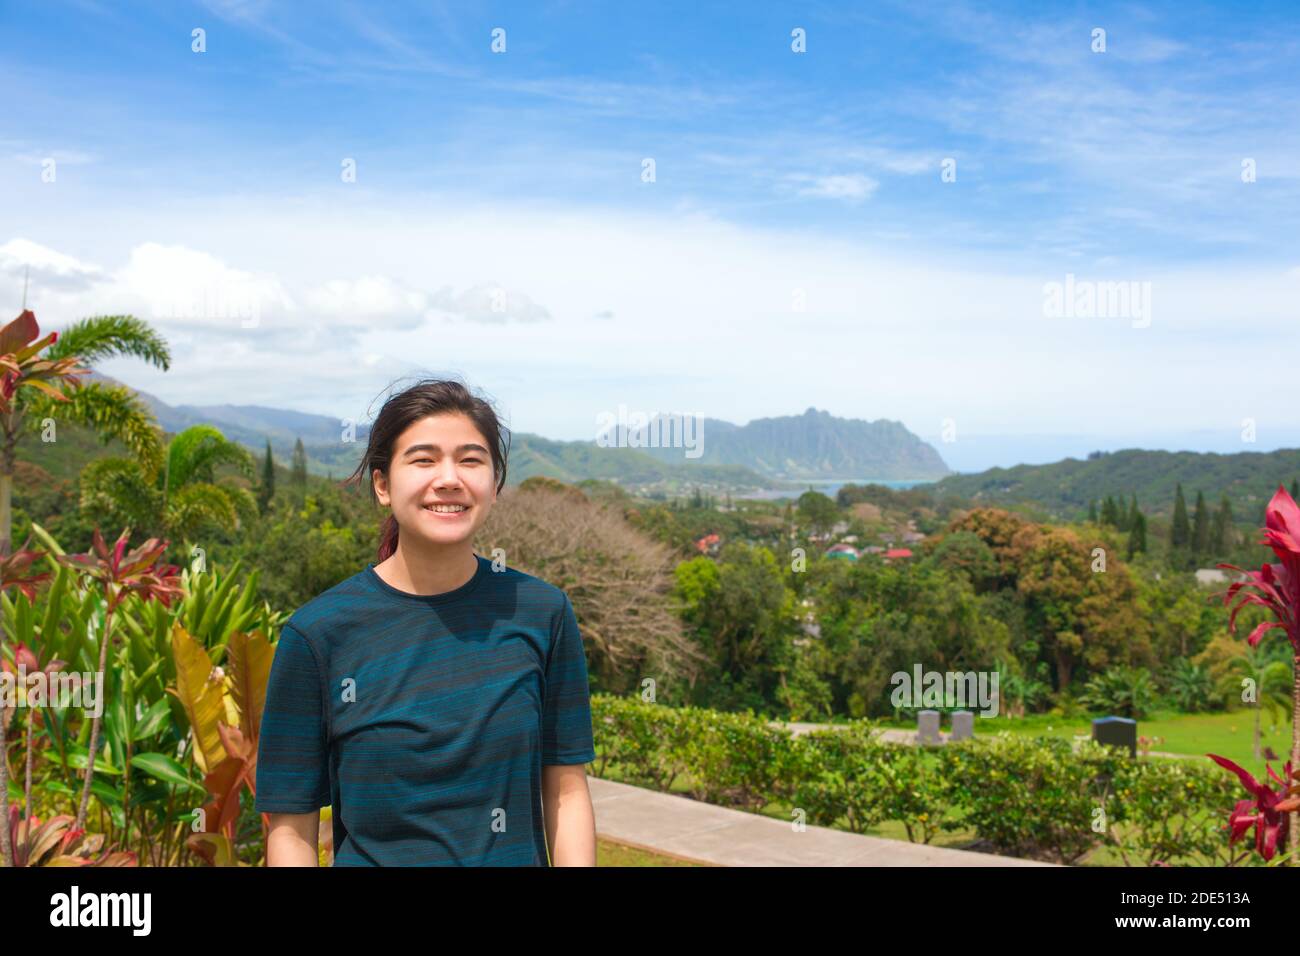 Smiling biracial teen girl outdoors in nature on sunny day with tropical ocean and mountains in background on island of Oahu, Hawaii Stock Photo